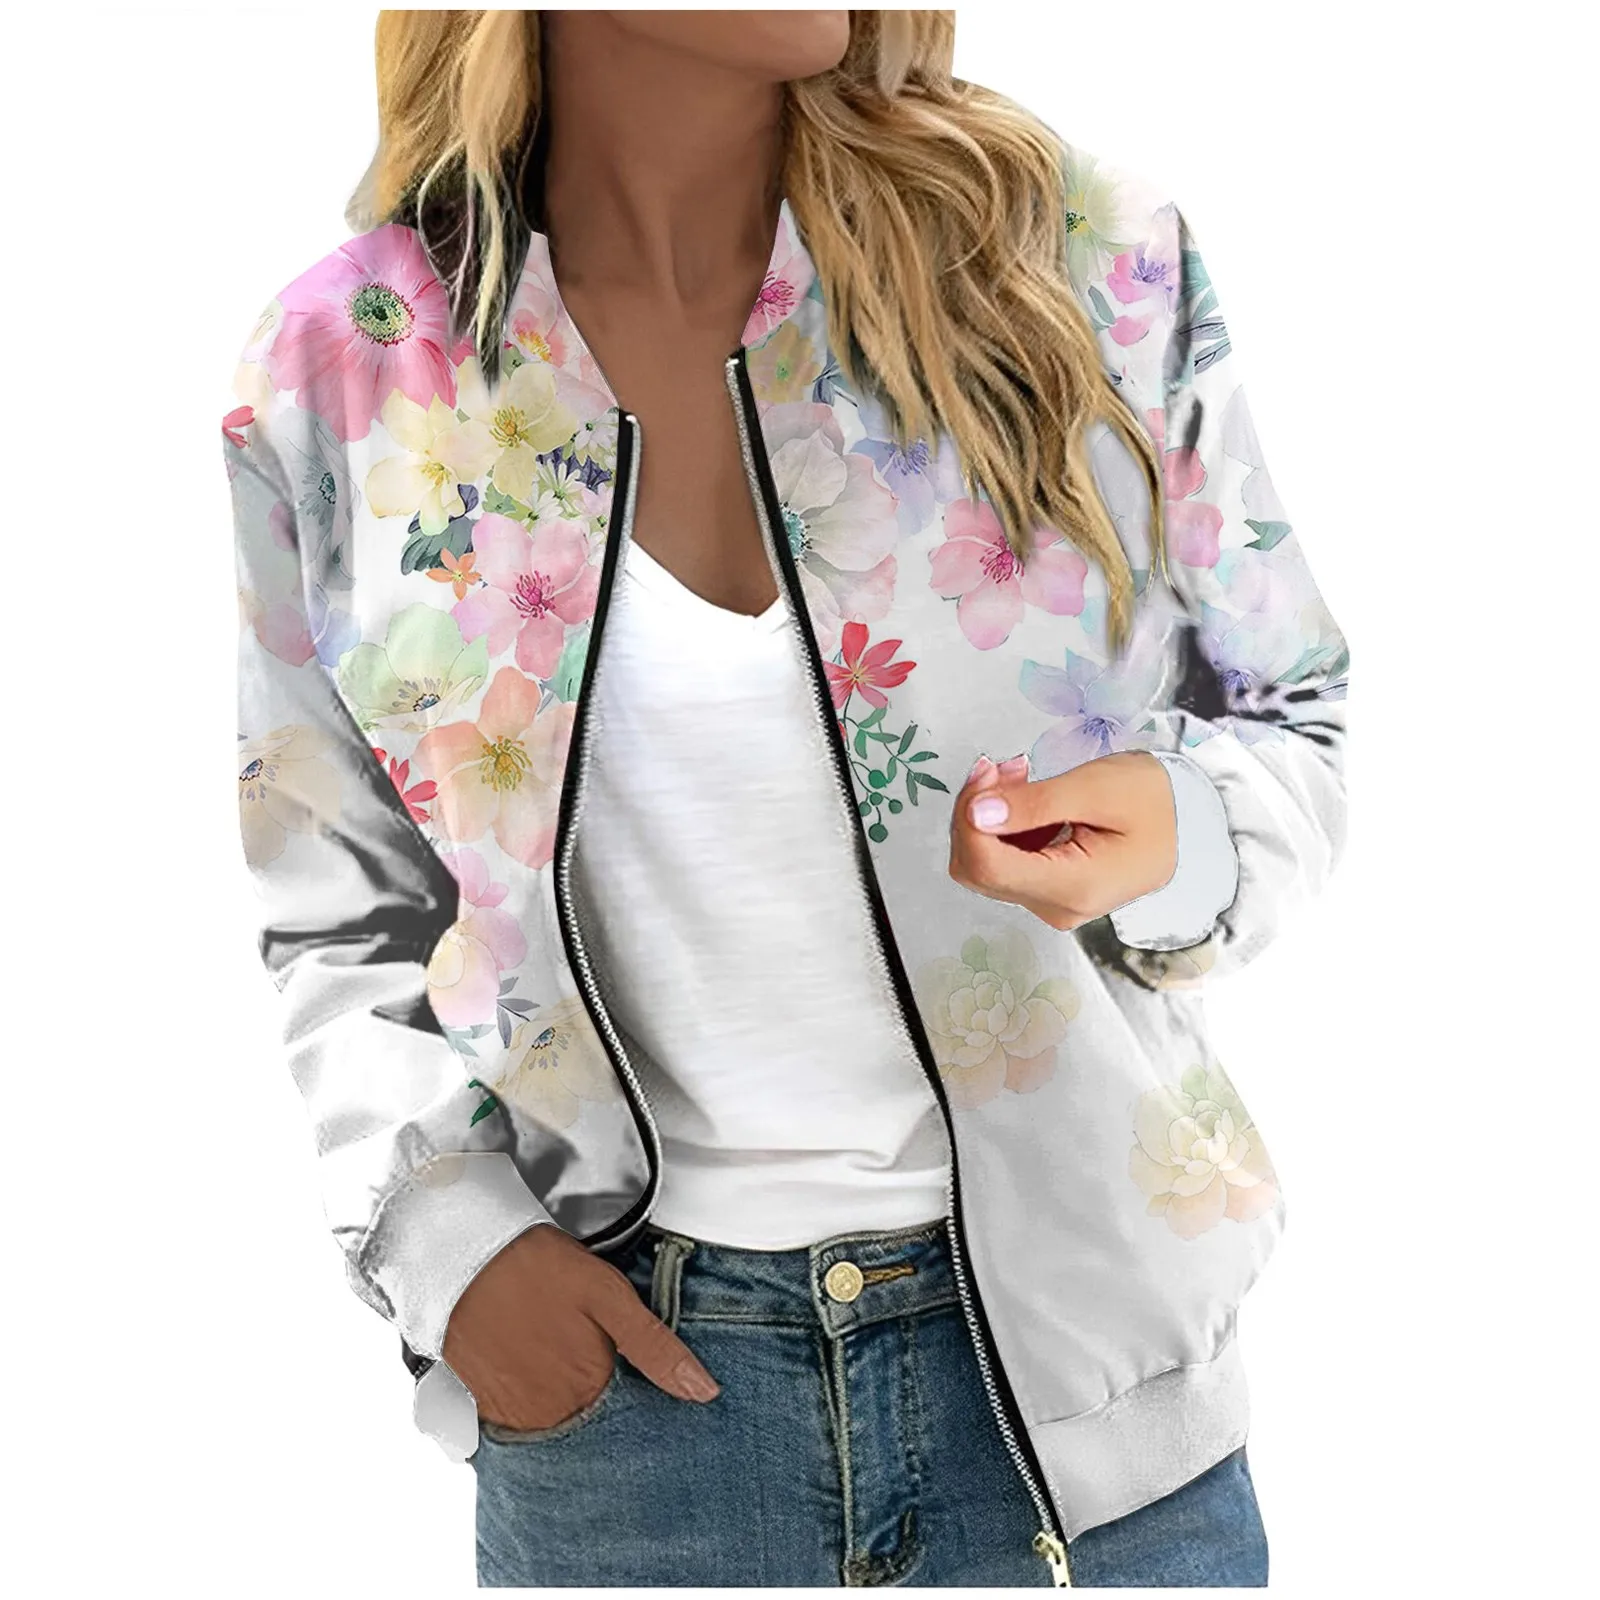 

Women'S Long-Sleeved Zipper Jacket Fashionable And Casual Printed Coat Versatile Everyday Winter Coat Chaquetas Para Mujeres